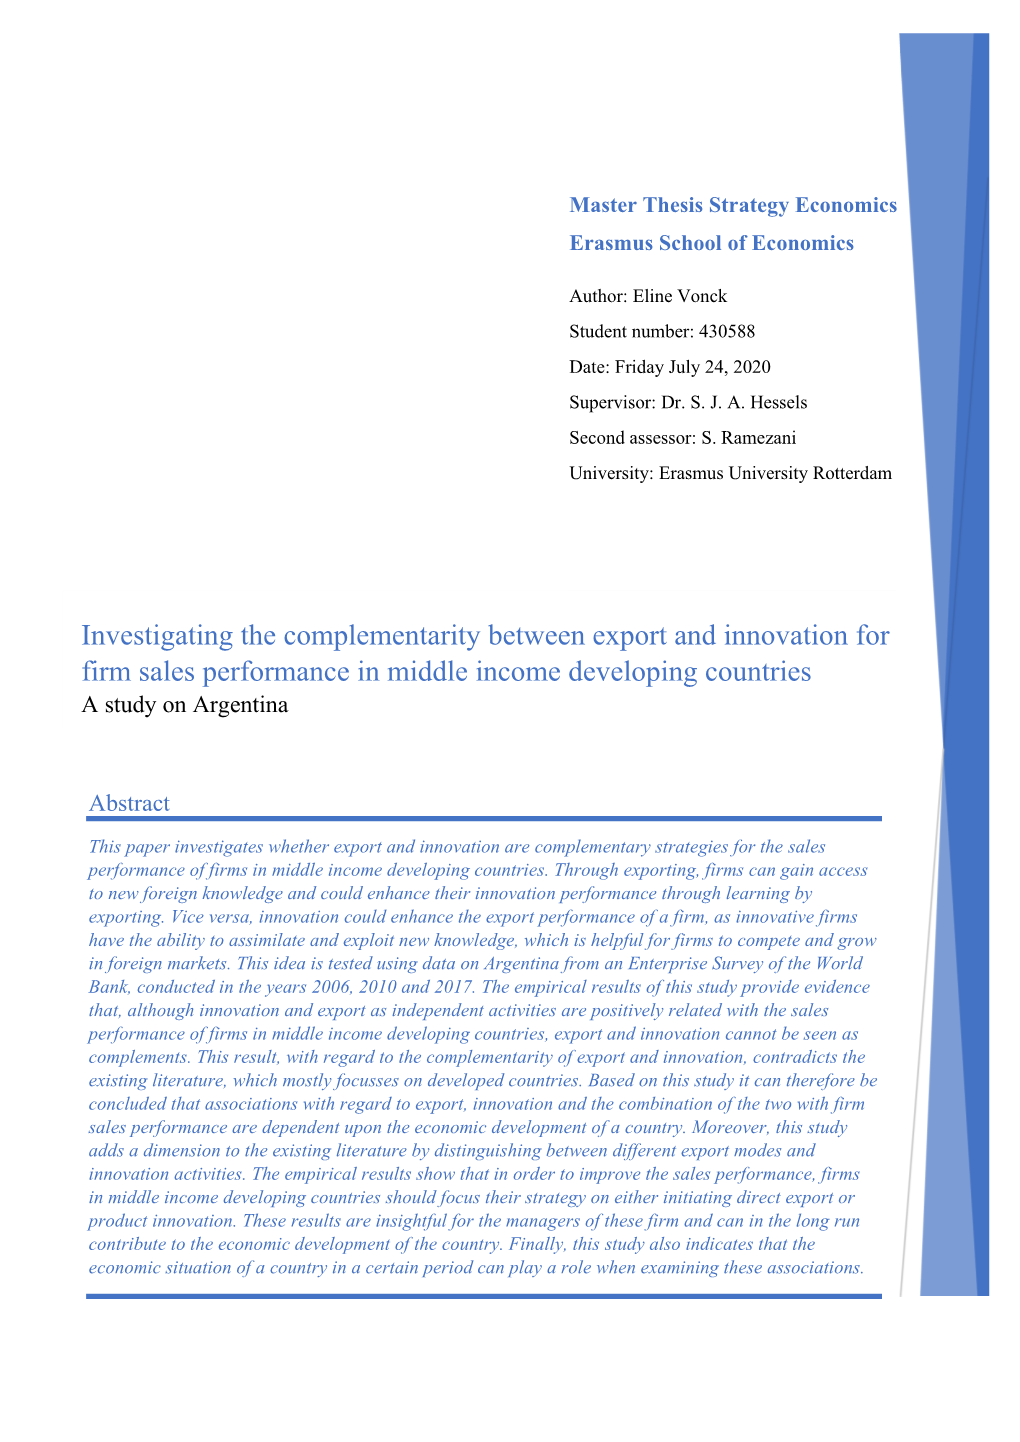 Investigating the Complementarity Between Export and Innovation for Firm Sales Performance in Middle Income Developing Countries a Study on Argentina